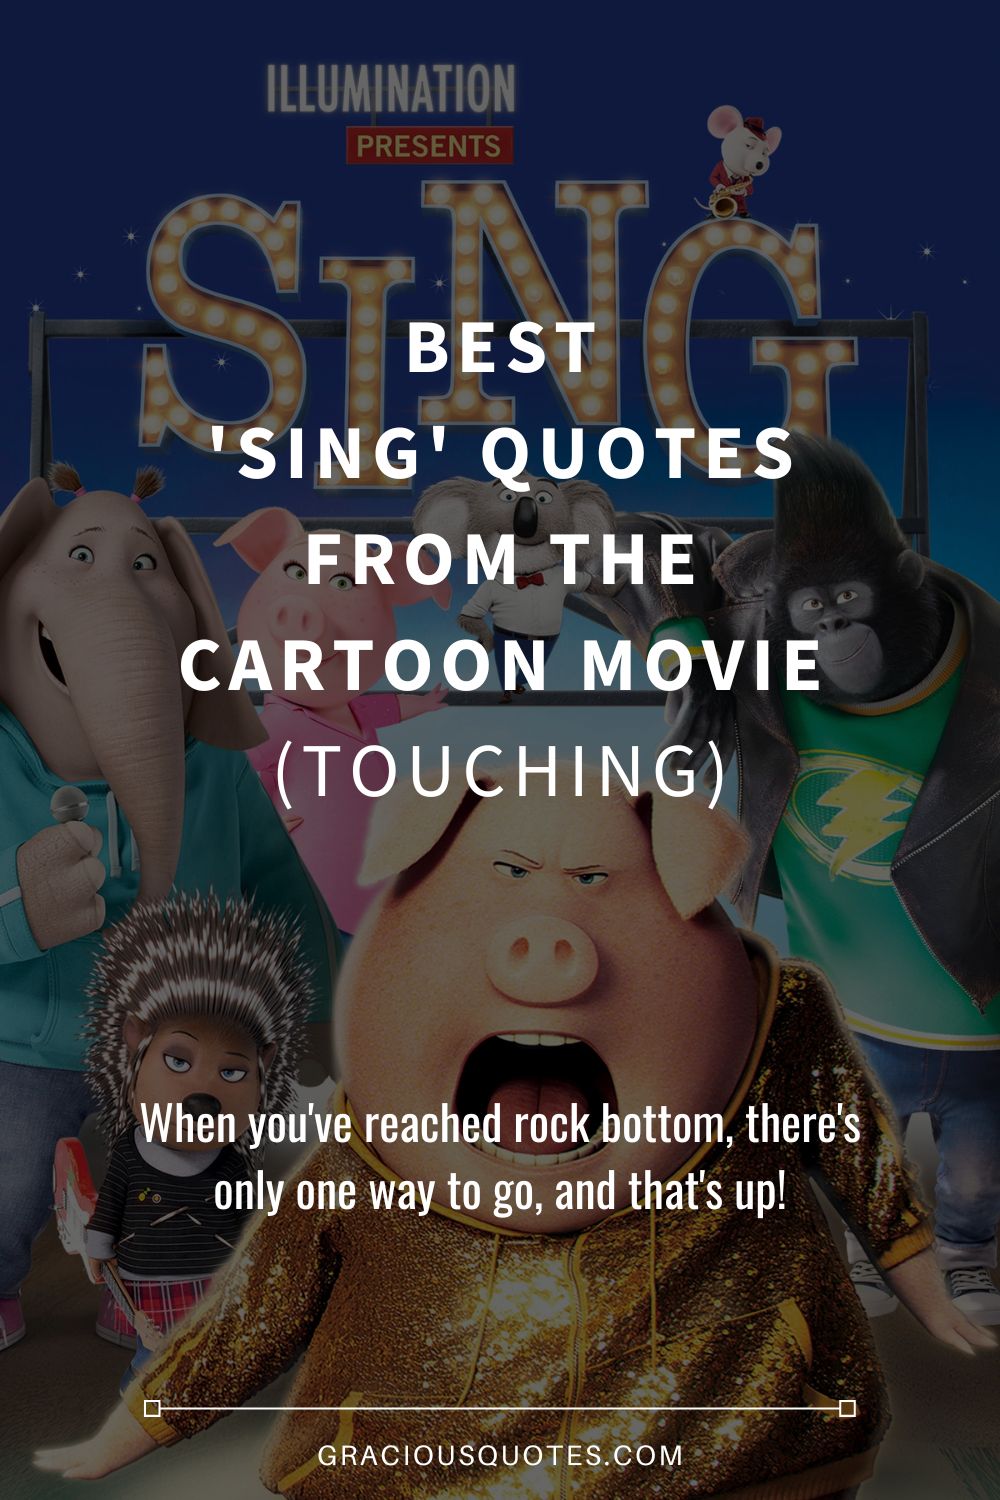 Best 'SING' Quotes from the Cartoon Movie (TOUCHING) - Gracious Quotes